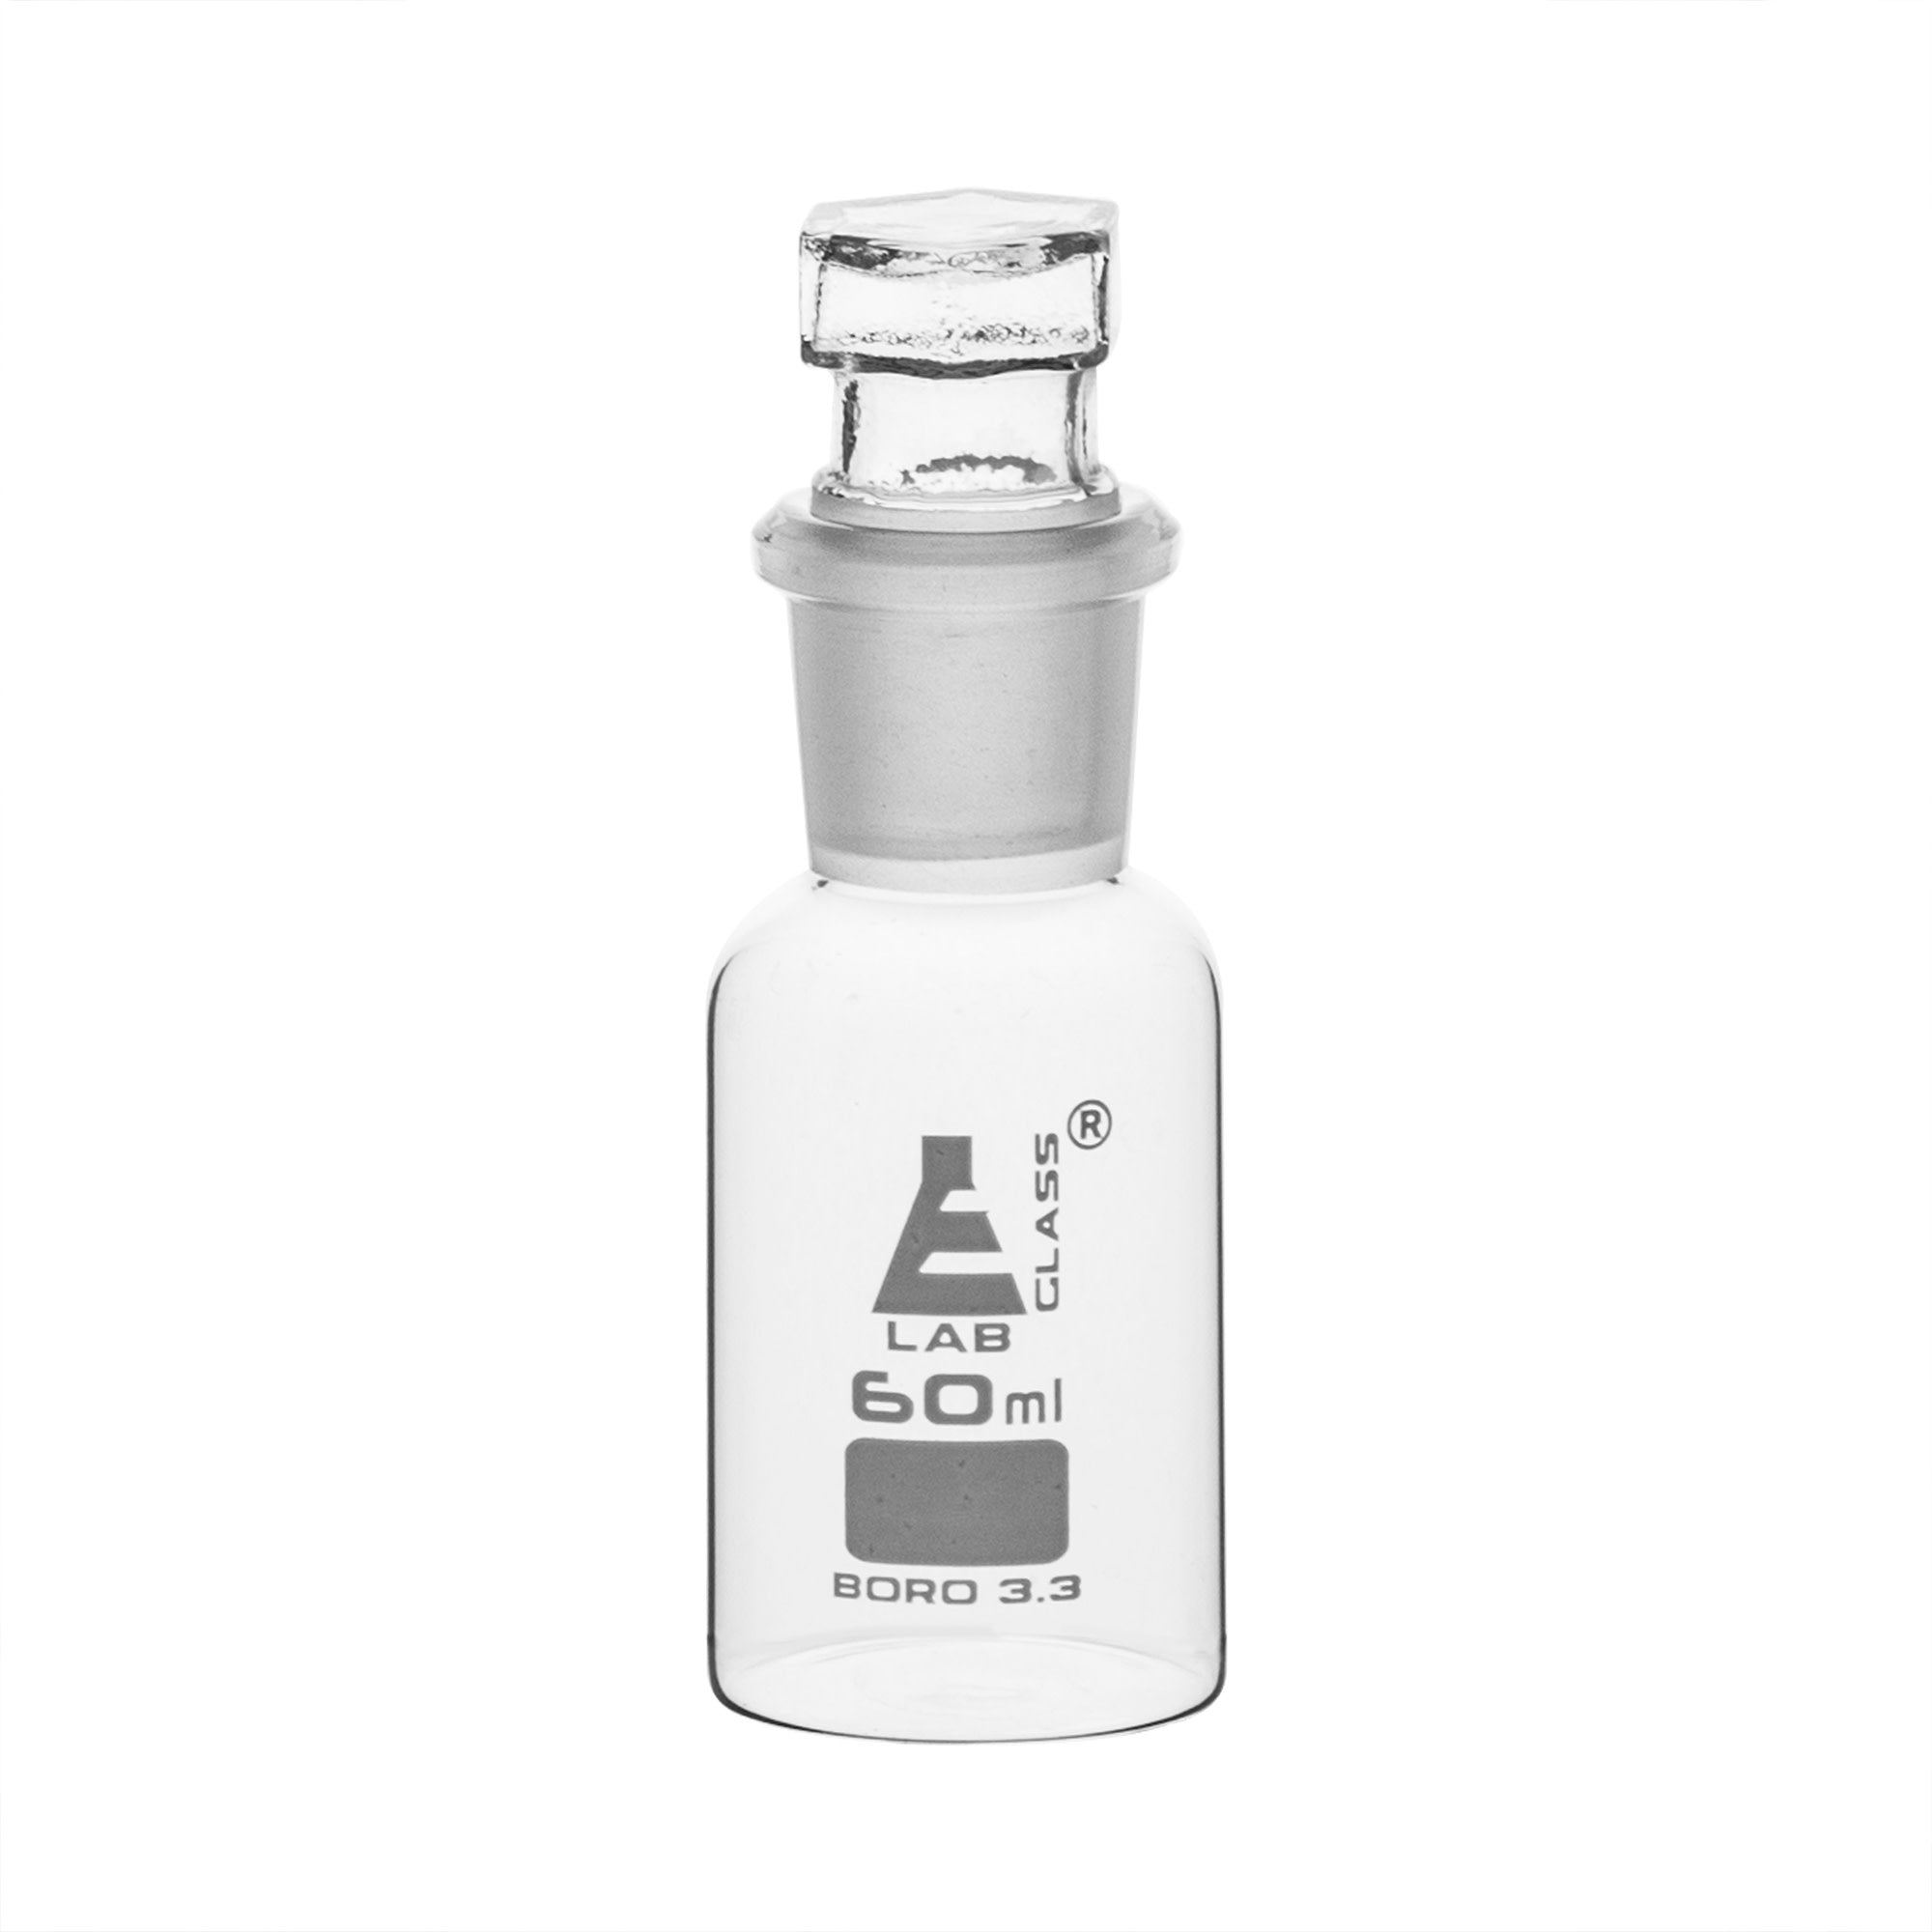 Clear Borosilicate Glass Reagent Bottle with Hollow Glass Stopper, 60 ml, Wide Mouth, Autoclavable